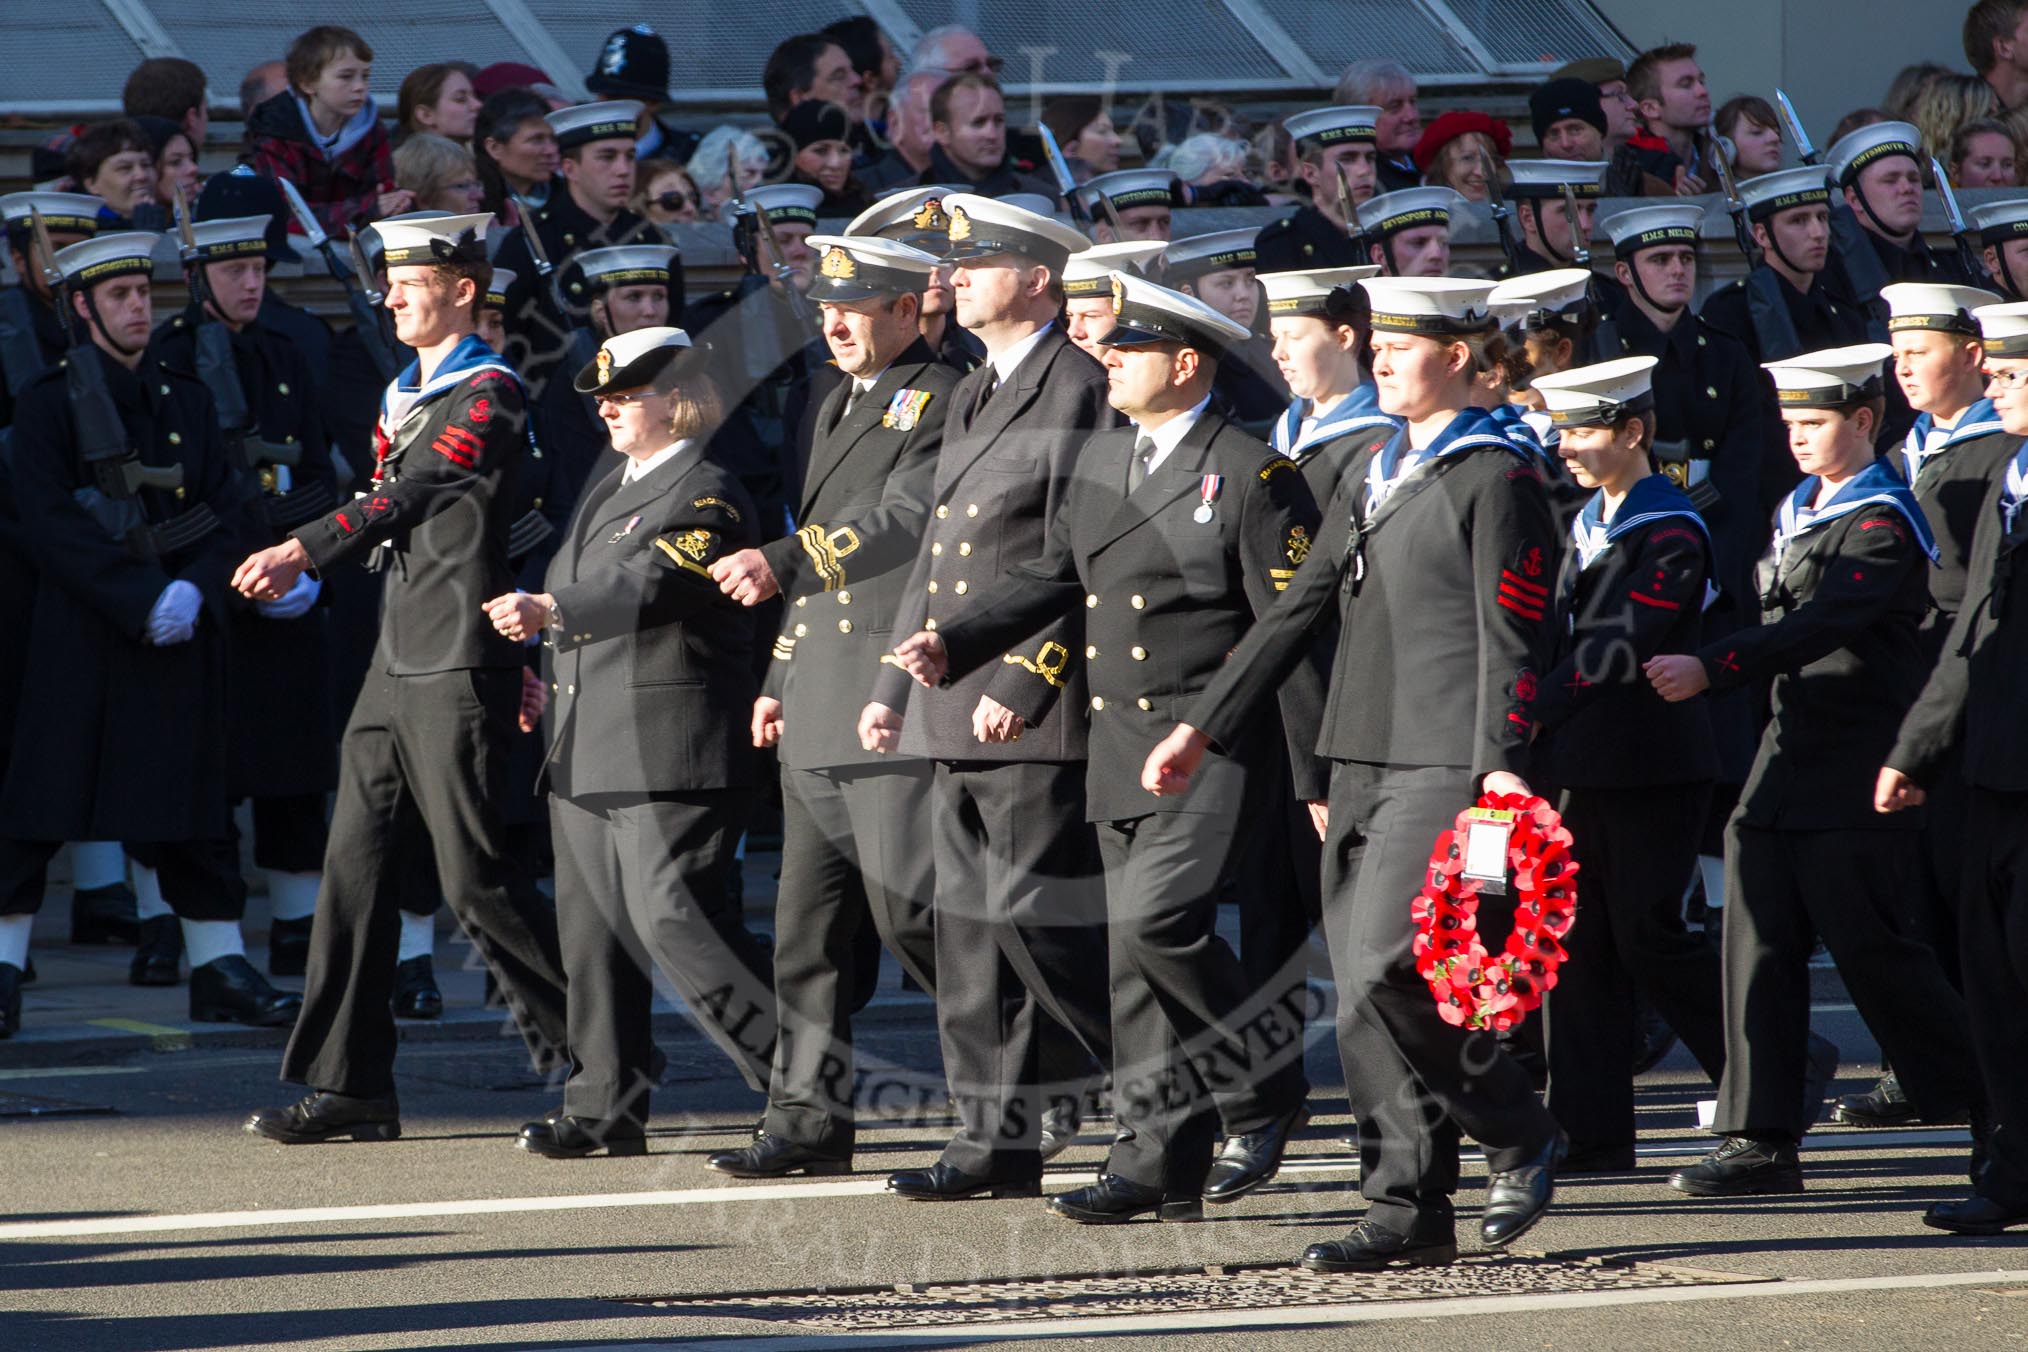 Remembrance Sunday 2012 Cenotaph March Past: Group M43 - Sea Cadet Corps..
Whitehall, Cenotaph,
London SW1,

United Kingdom,
on 11 November 2012 at 12:14, image #1680